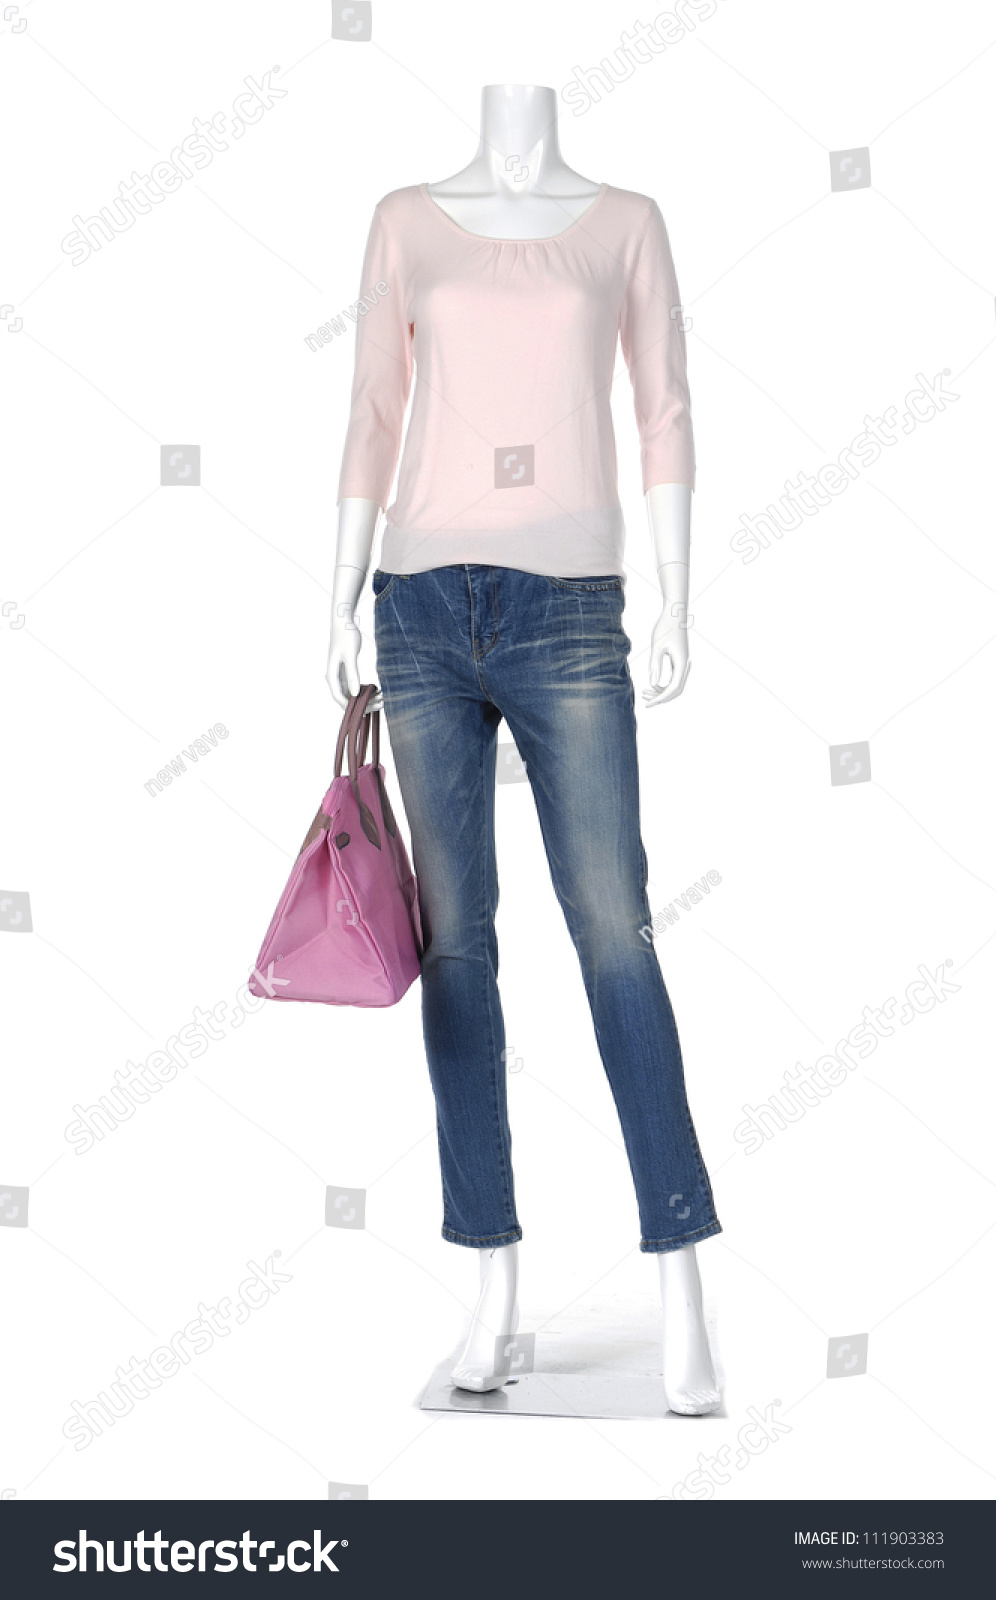 Full Length Female Mannequin In Jeans Casual Peignoir Clothes With Bag ...